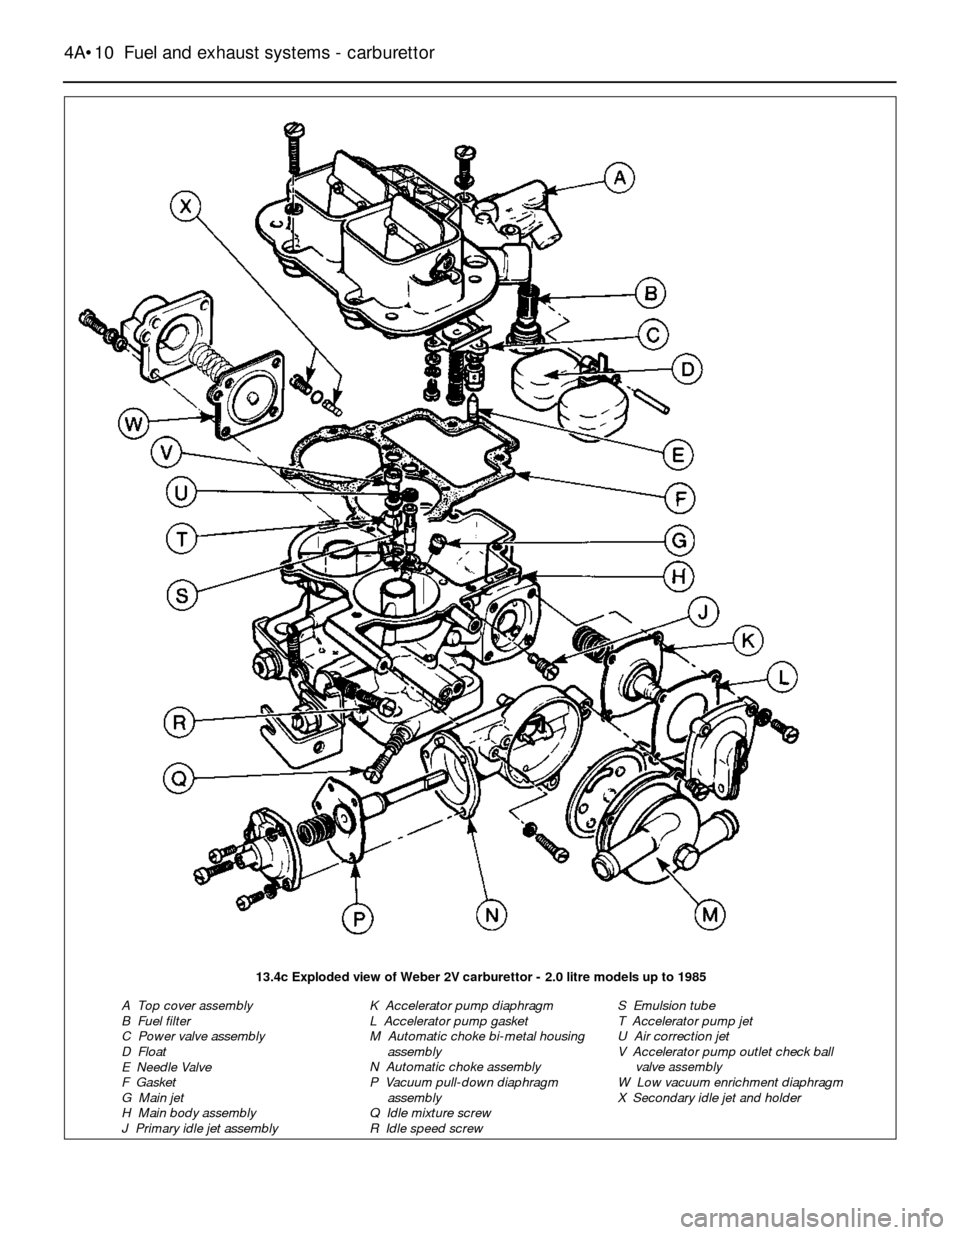 FORD SIERRA 1989 2.G Fuel And Exhaust Systems Carburettor Workshop Manual 4A•10Fuel and exhaust systems - carburettor
13.4c Exploded view of Weber 2V carburettor - 2.0 litre models up to 1985
A  Top cover assembly
B  Fuel filter
C  Power valve assembly
D  Float
E  Needle 